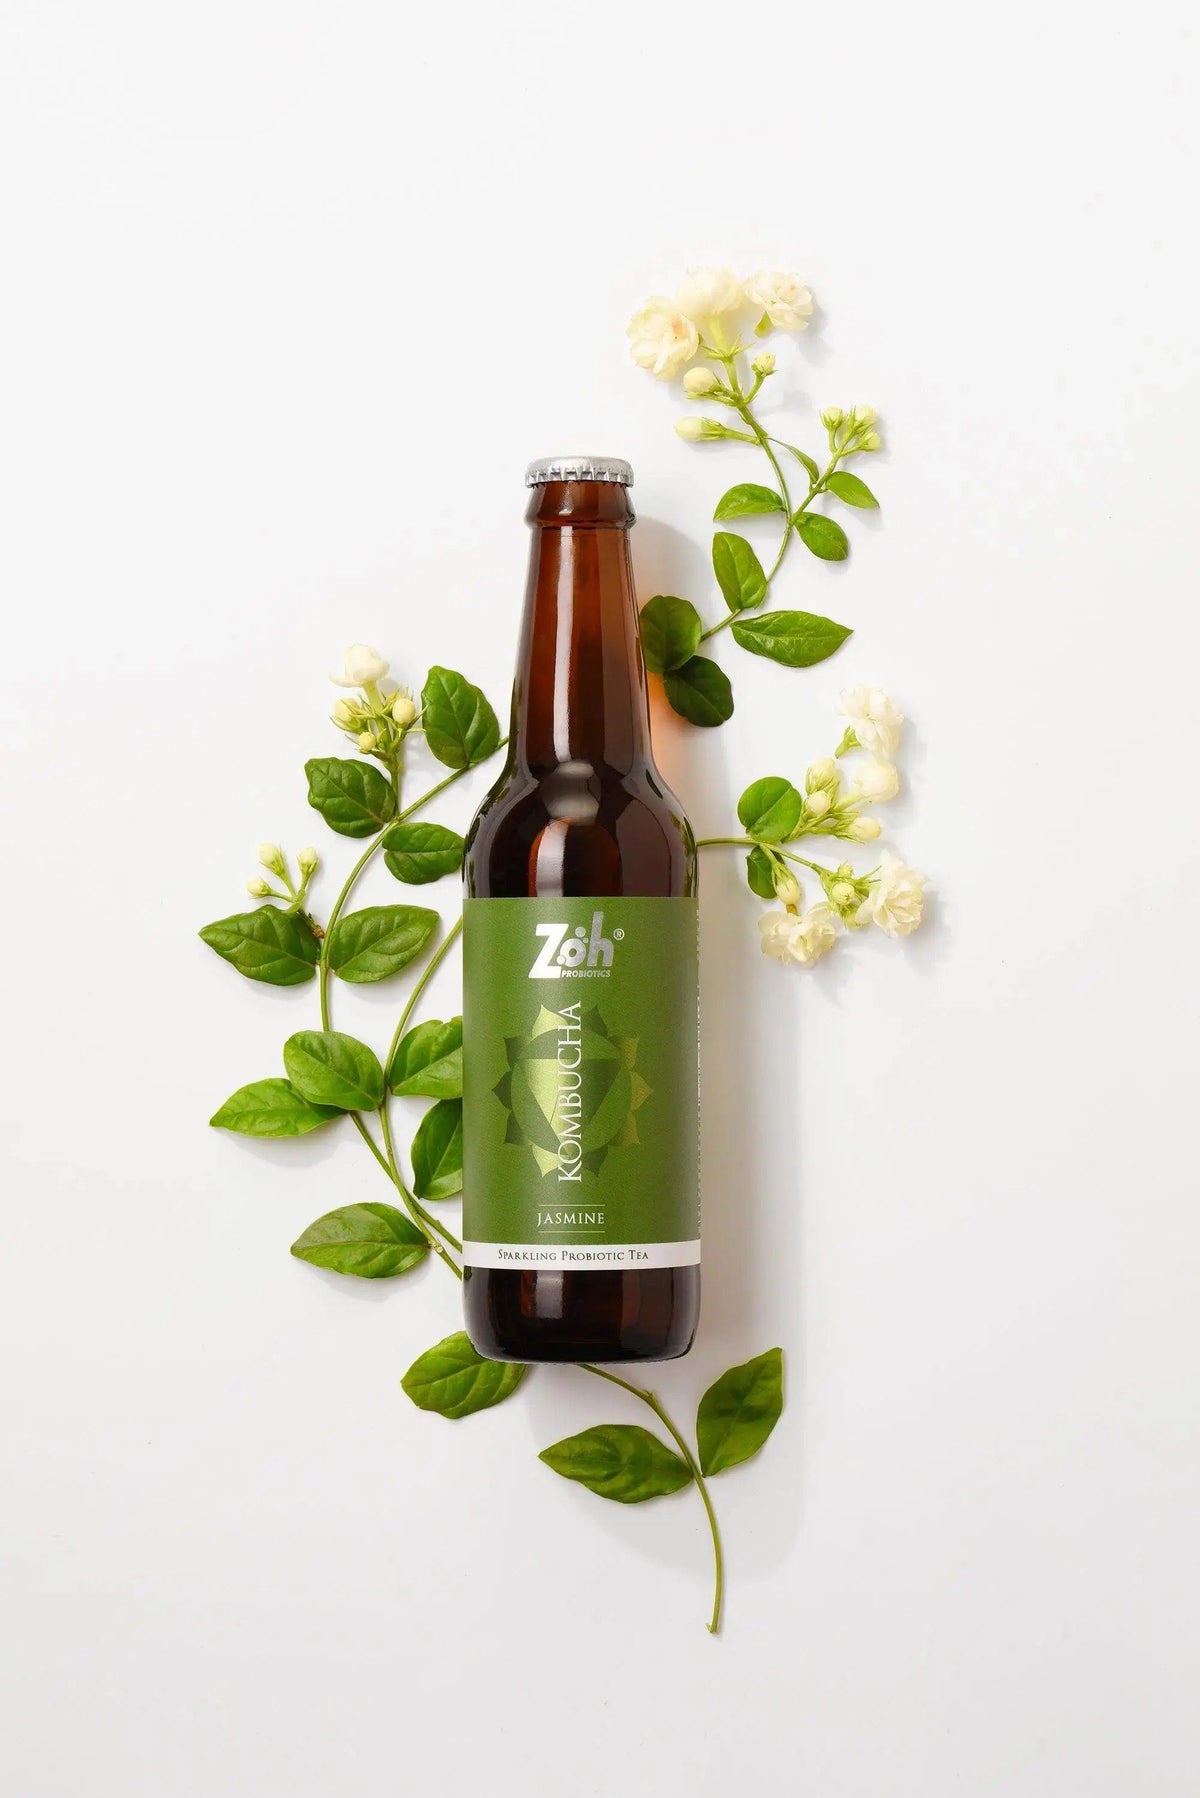 Jasmine Kombucha by Zoh: Aromatic Jasmine Blend, Top Shot Image, Best Choice for Mental Health and Relaxation, India